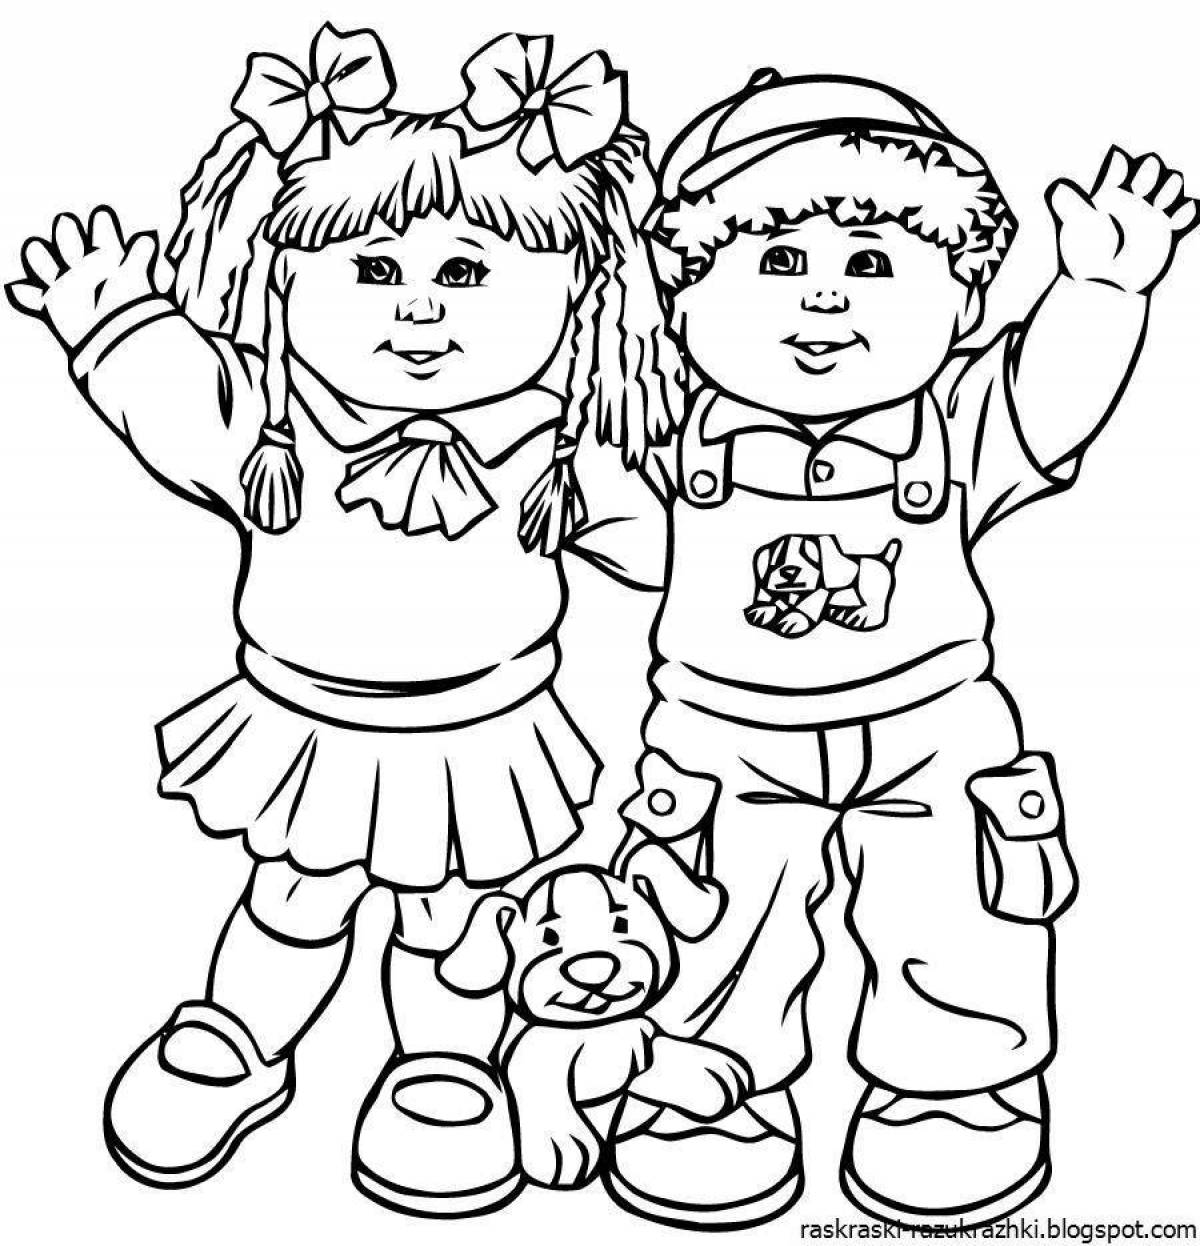 Color fever coloring book for kids